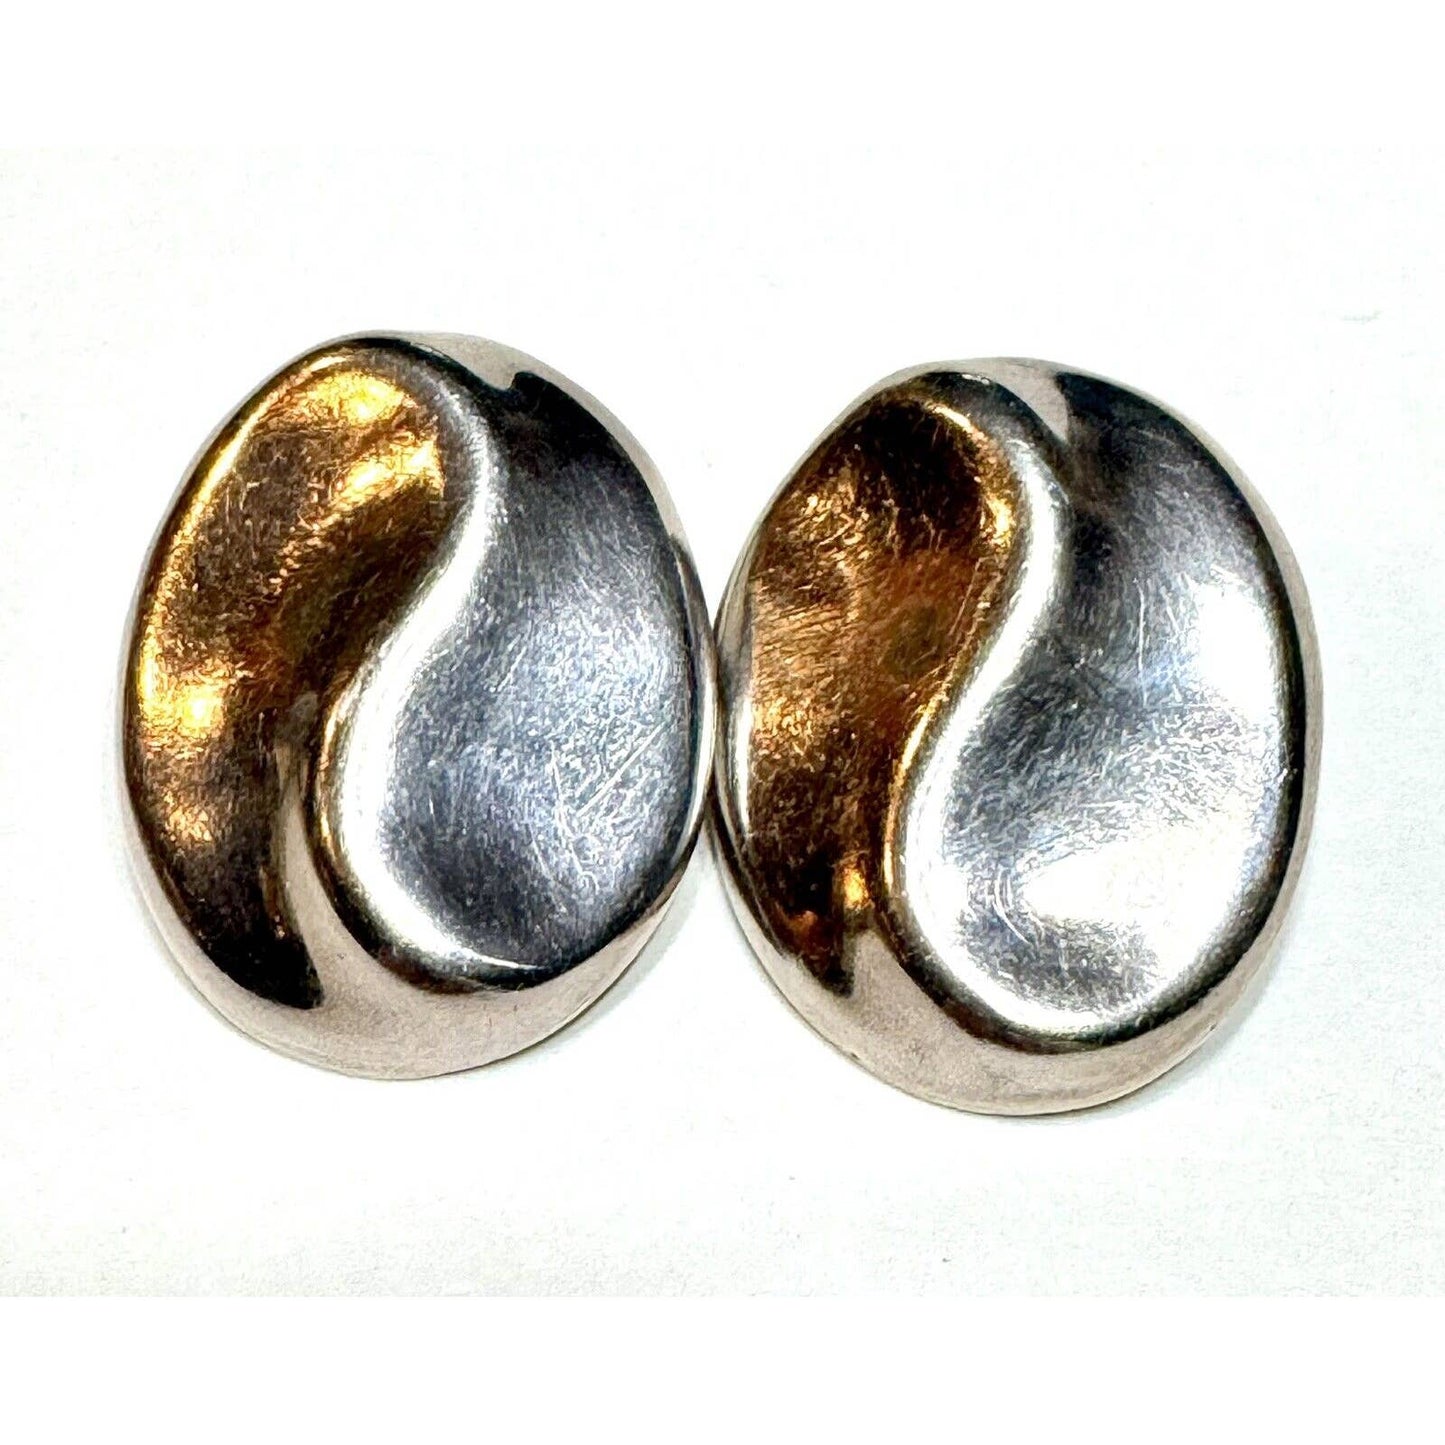 Unbranded925 Silver (Sterling) Earrings Retro Mexico TD-56 Clip On Yin Yang Swirl Style - Black Dog Vintage